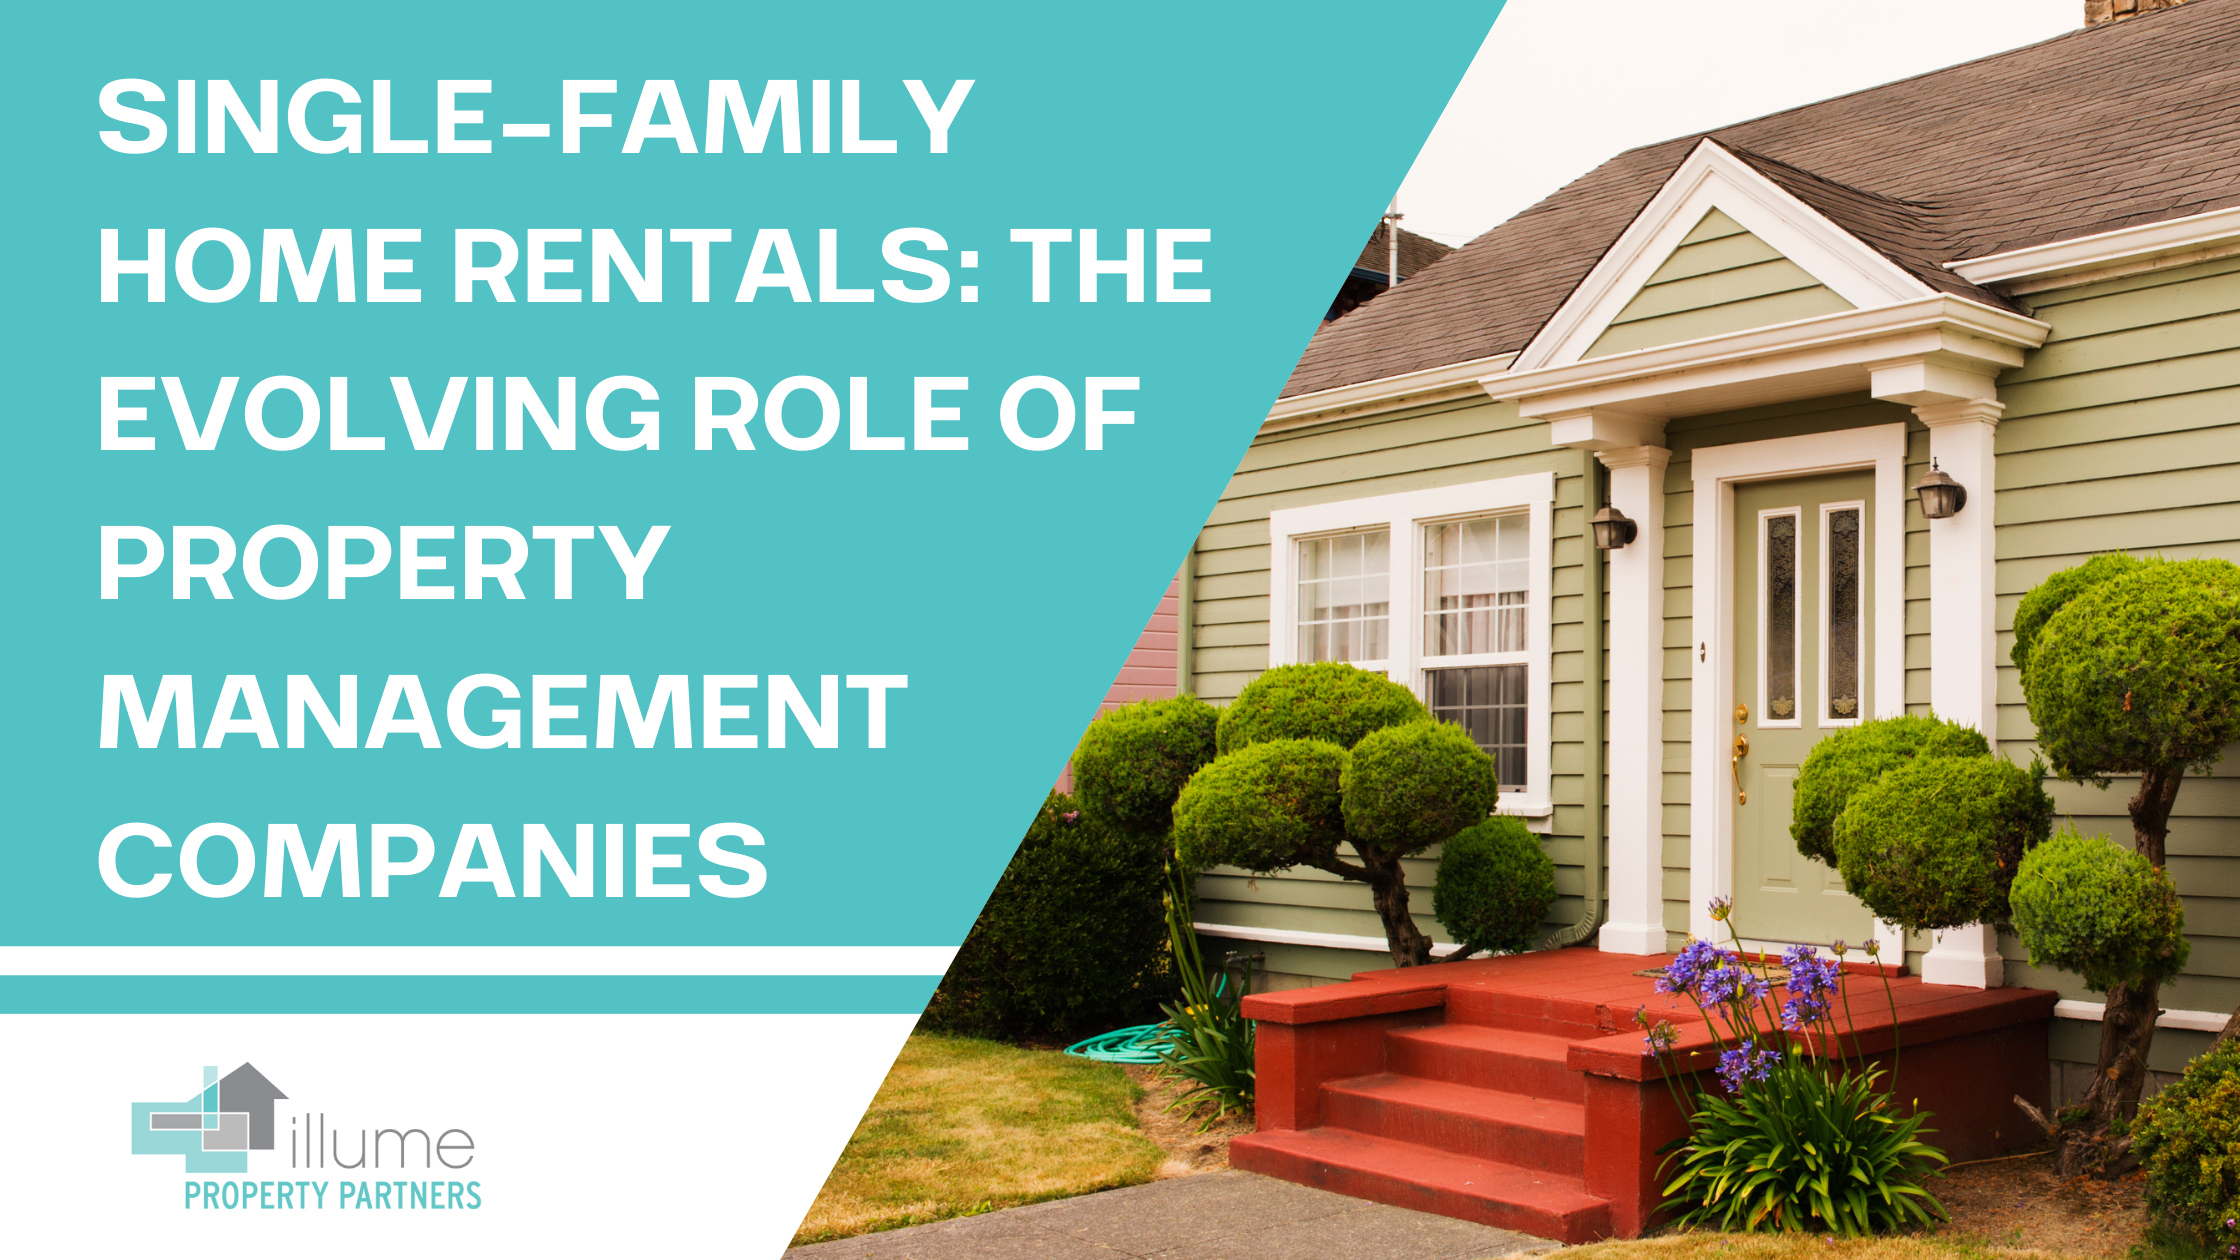 The Rise and Ramifications of Single-Family Home Rentals